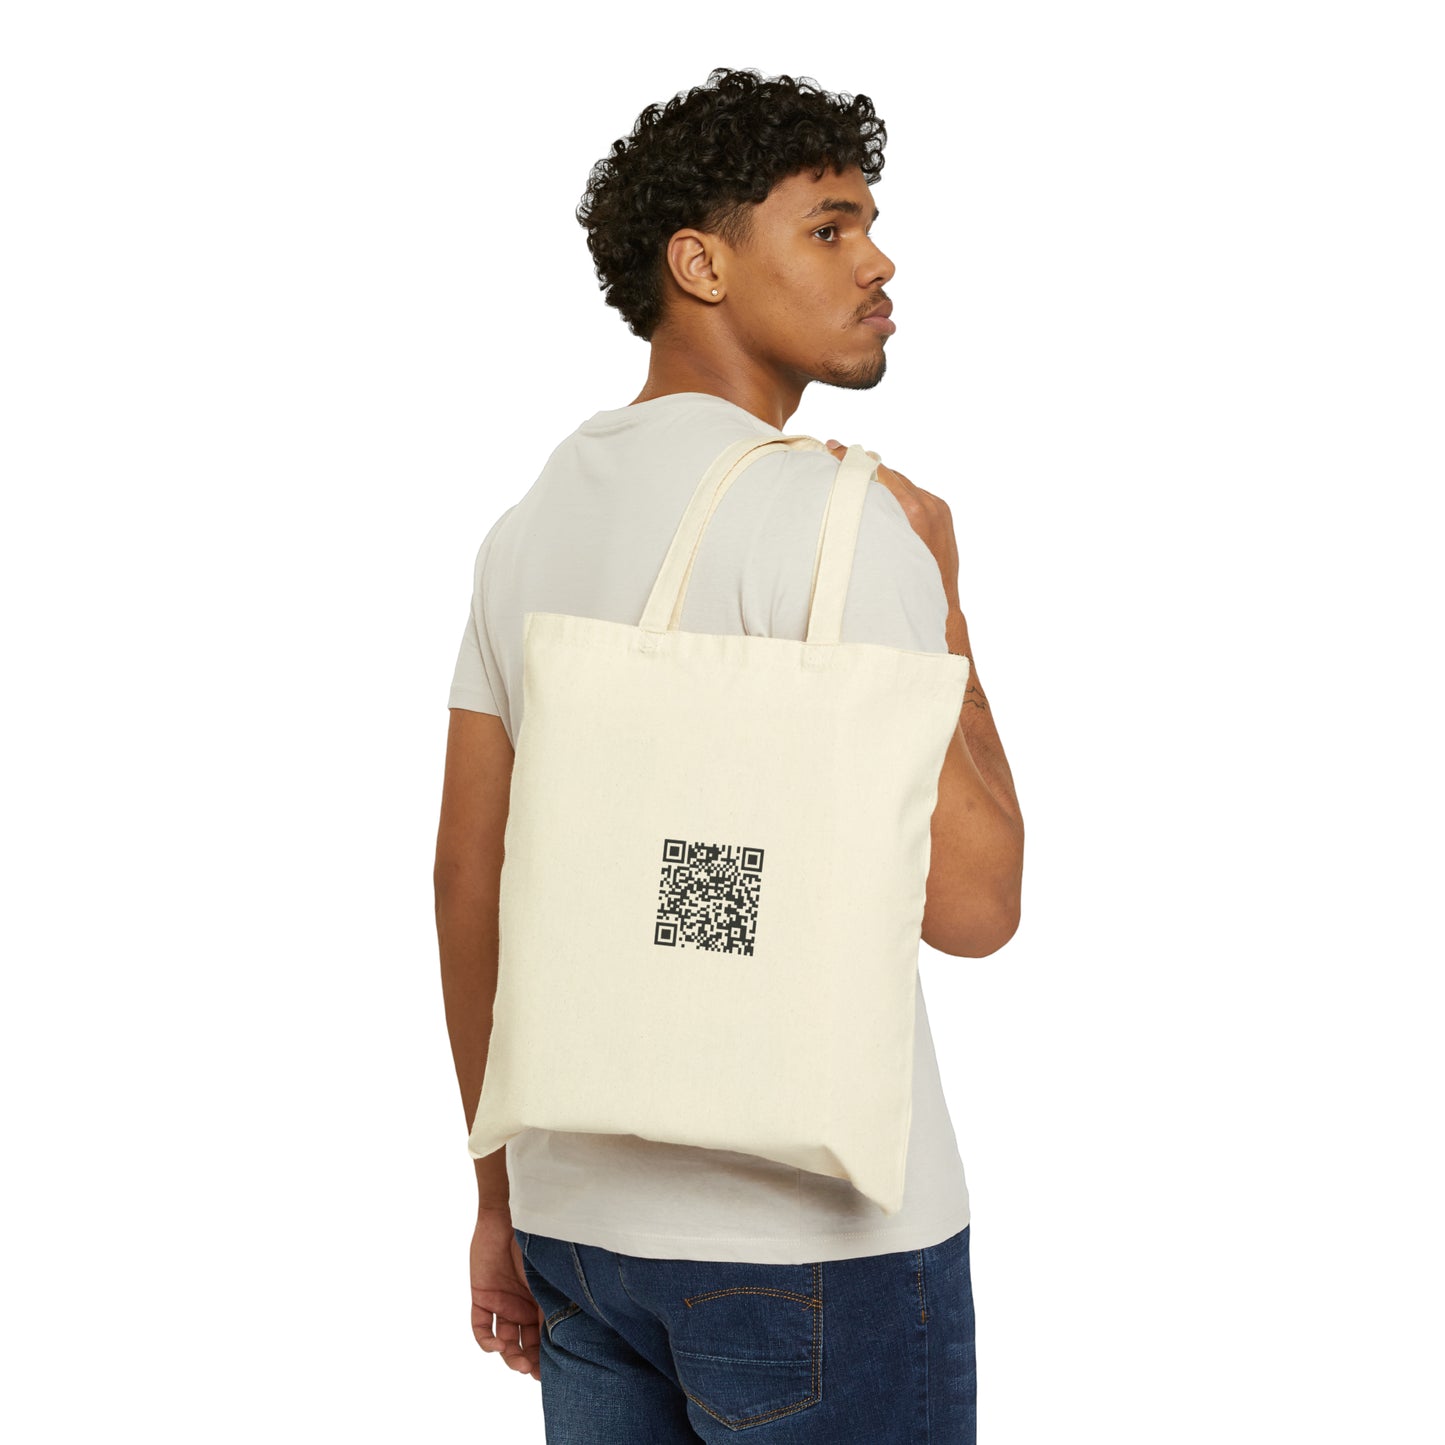 The Murder - Cotton Canvas Tote Bag